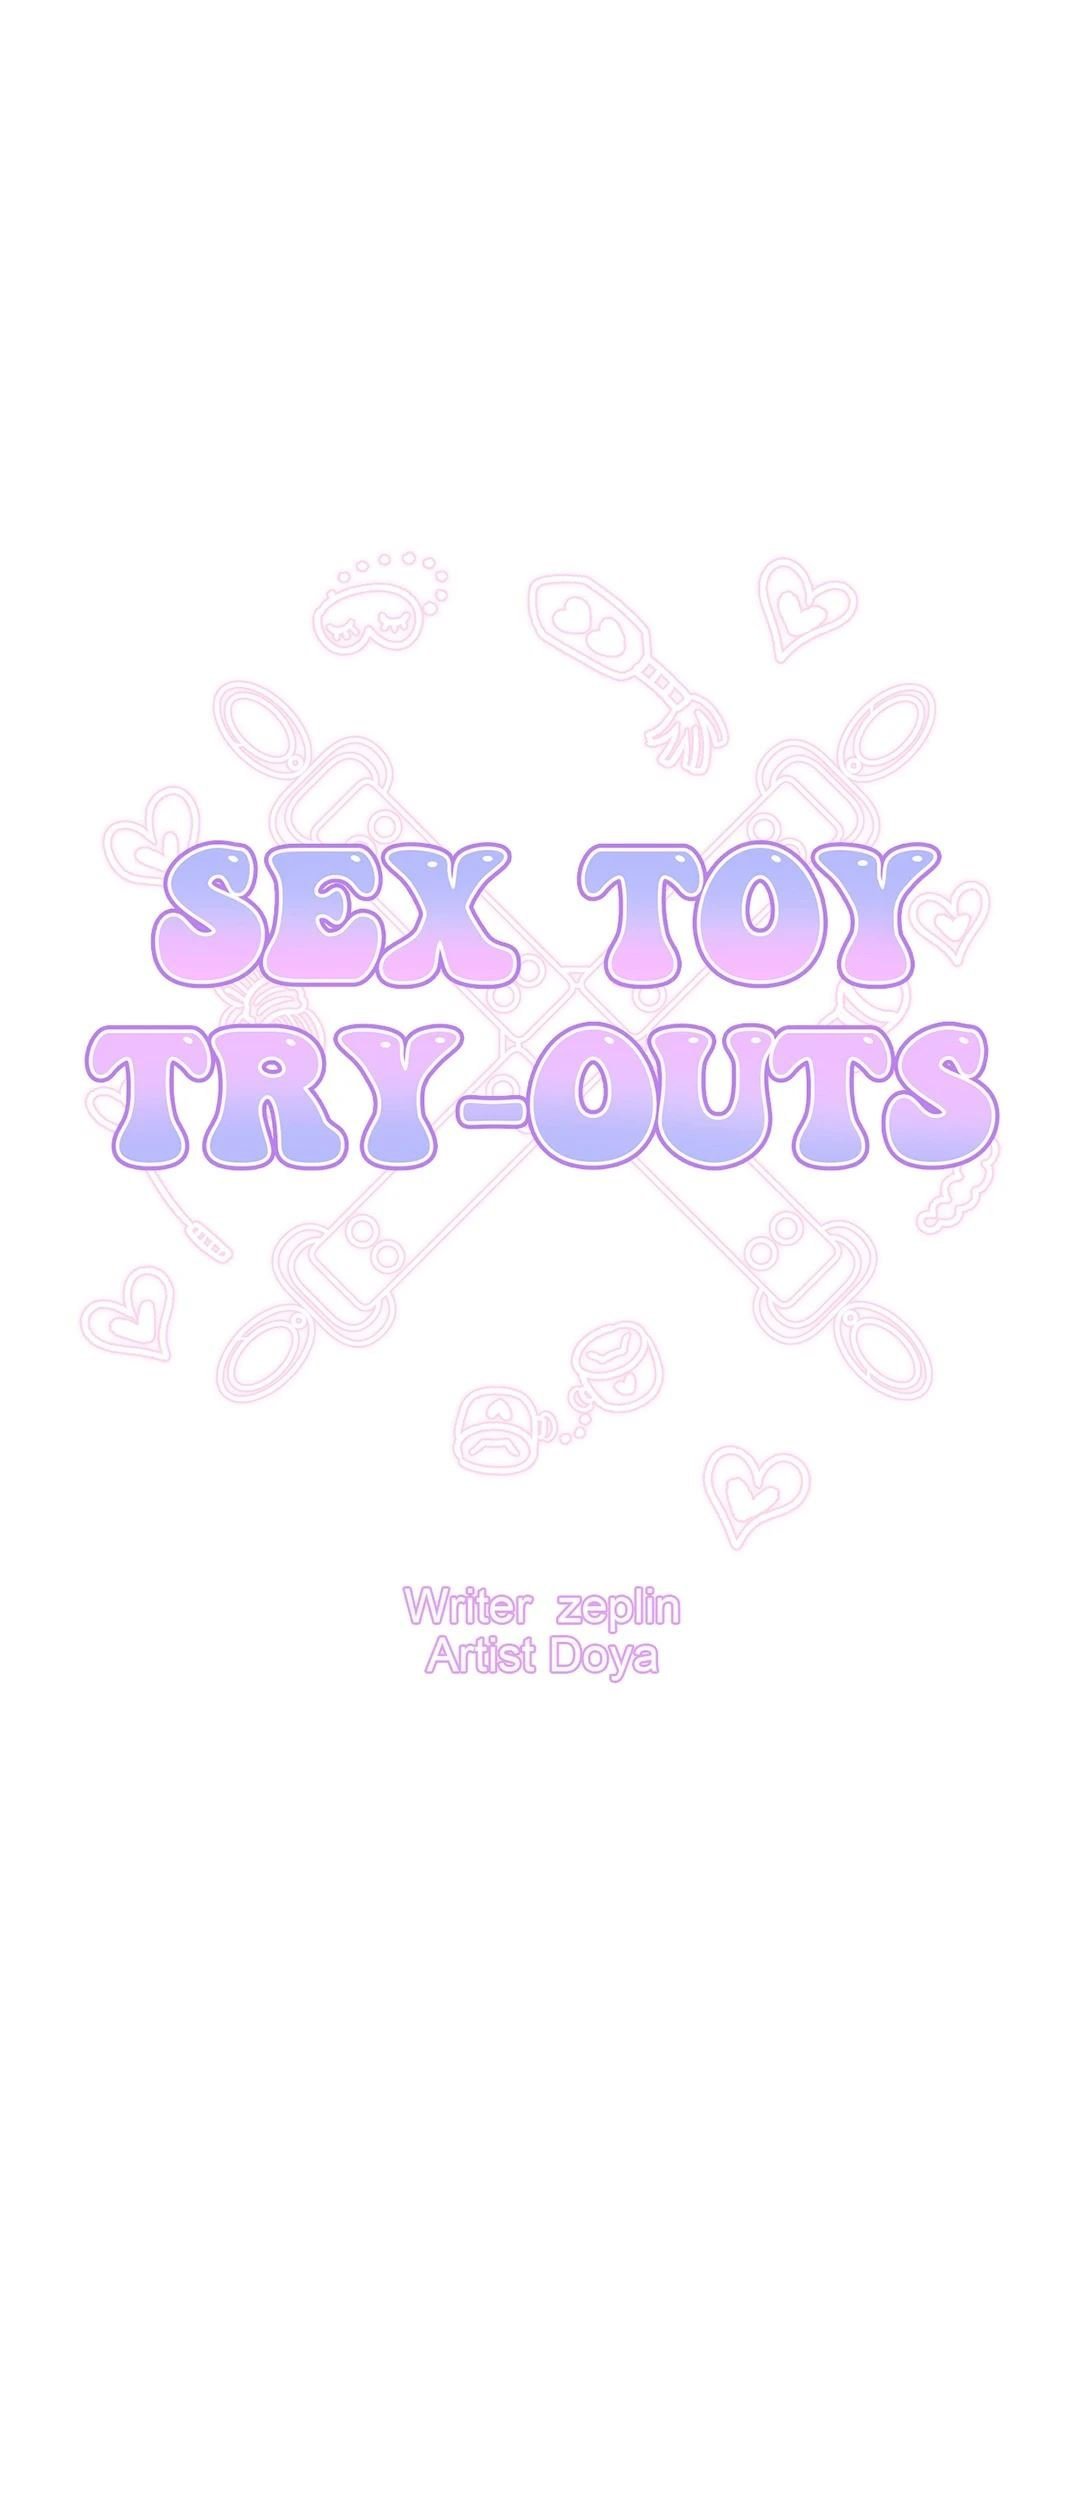 sex-toy-try-outs-chap-28-5